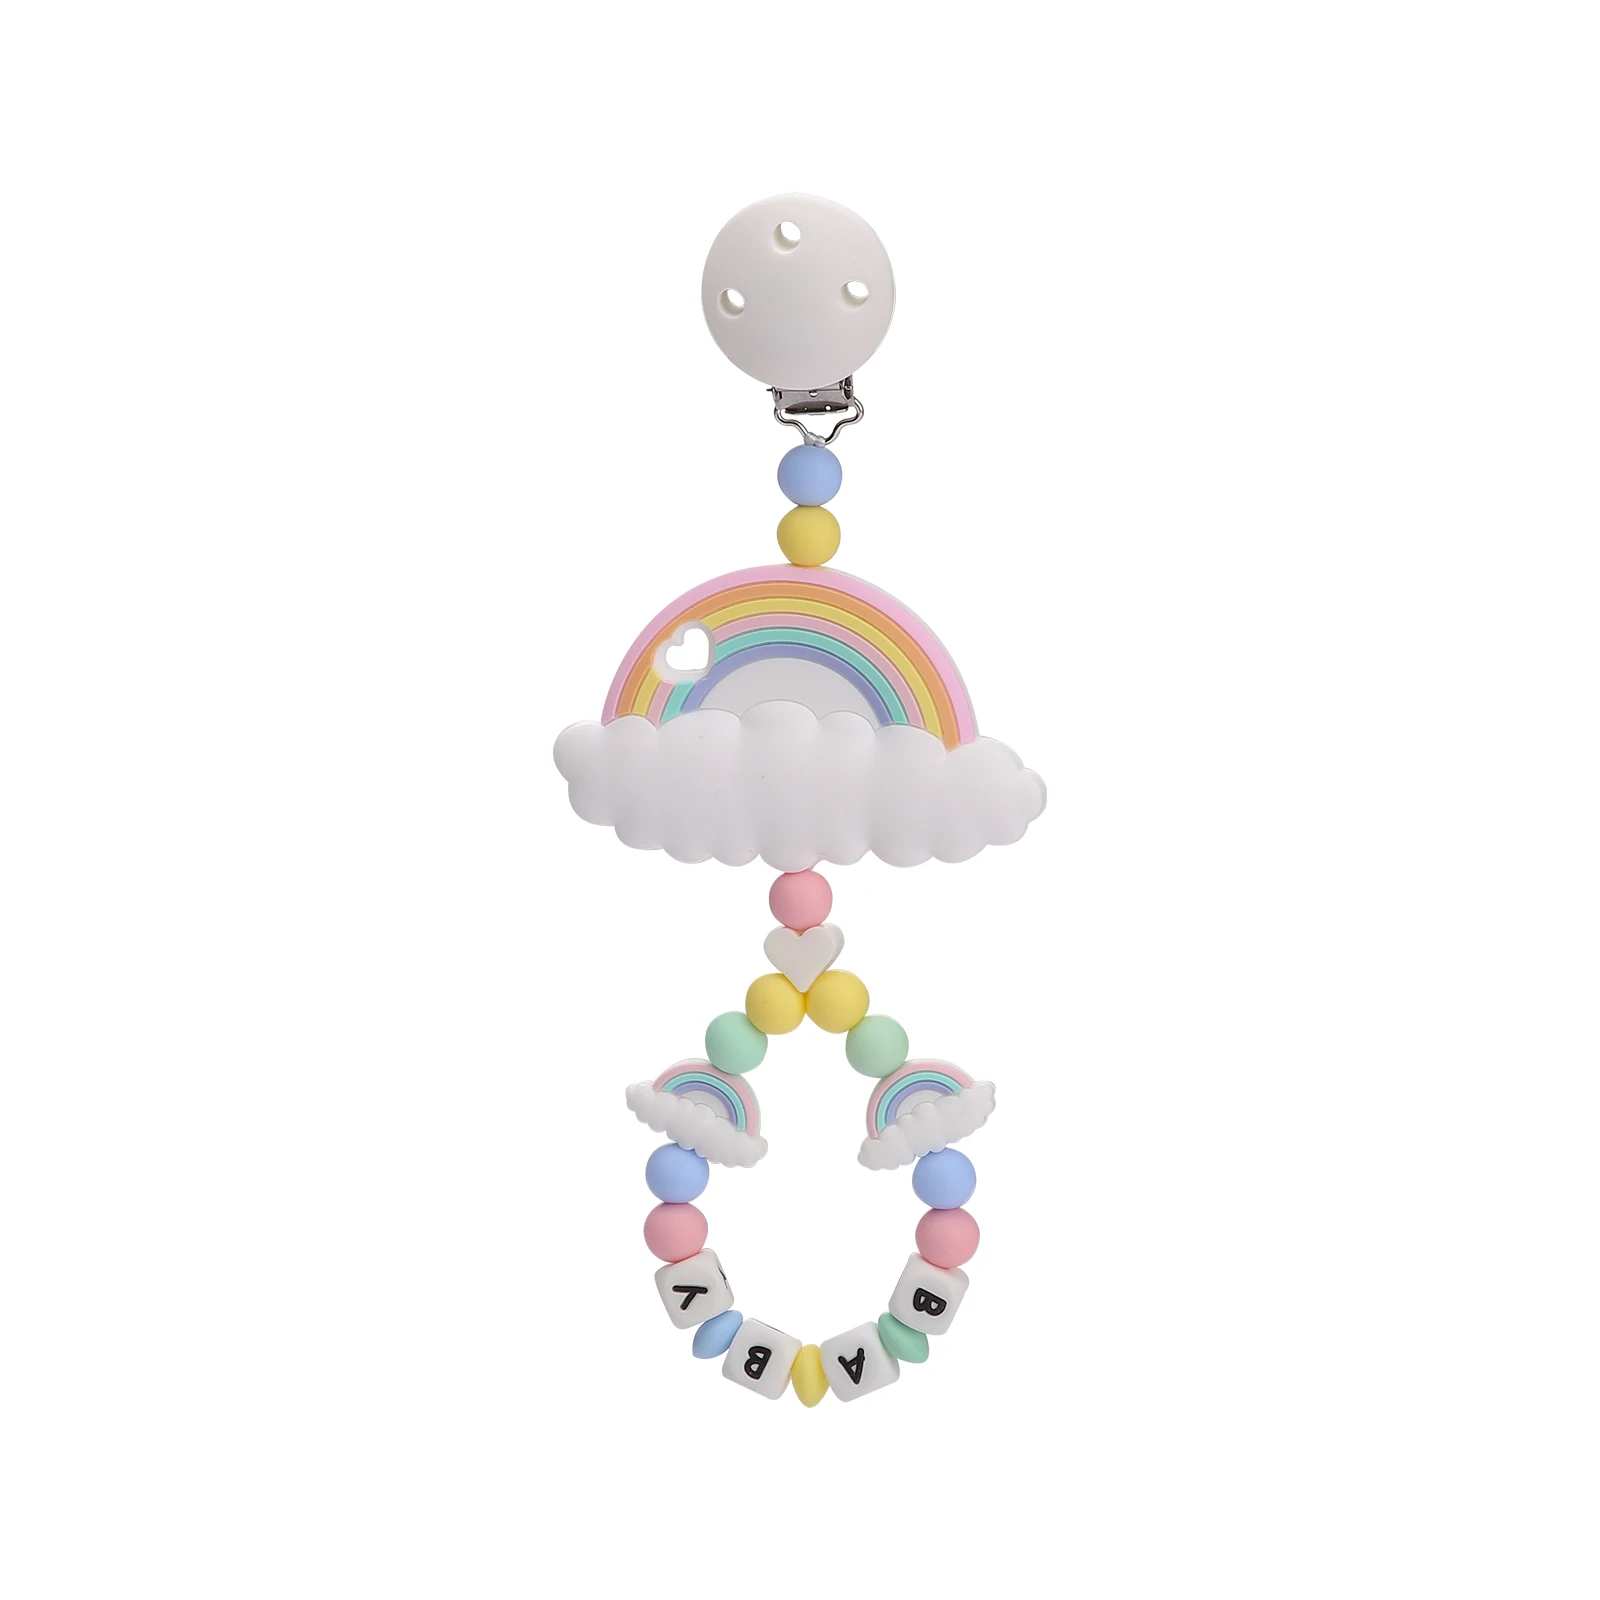 1pcs Bite Baby Silicone Pacifier Chains Rainbow Clouds Cartoon Teething Chain Baby Teether Soother Chew Dummy Clip Nipple Holder